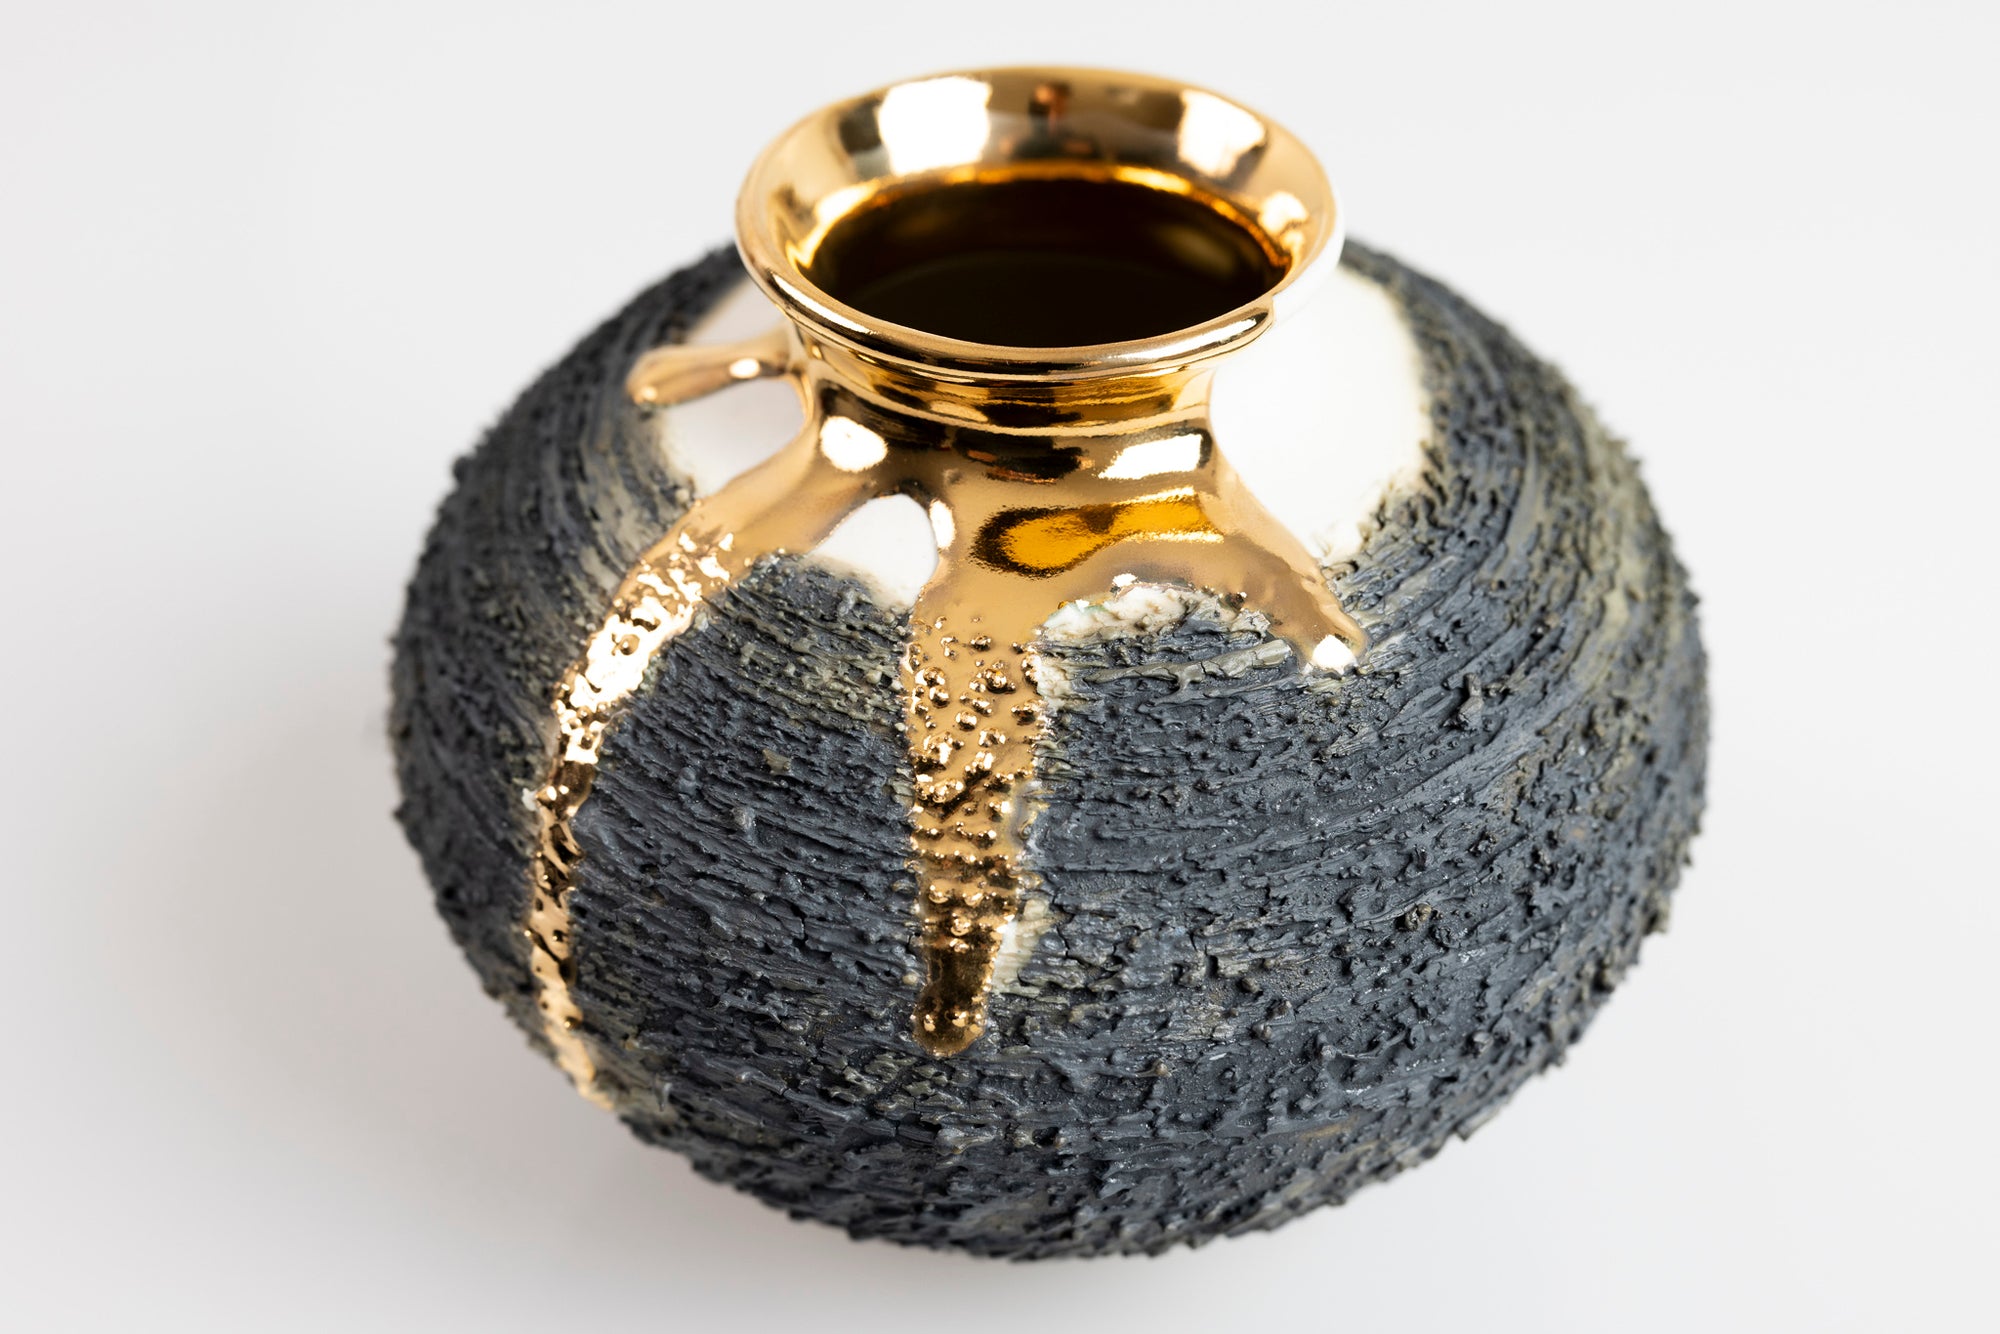 Textured vase with gold lustre, by Alex McCarthy, available at Padstow Gallery, Cornwall